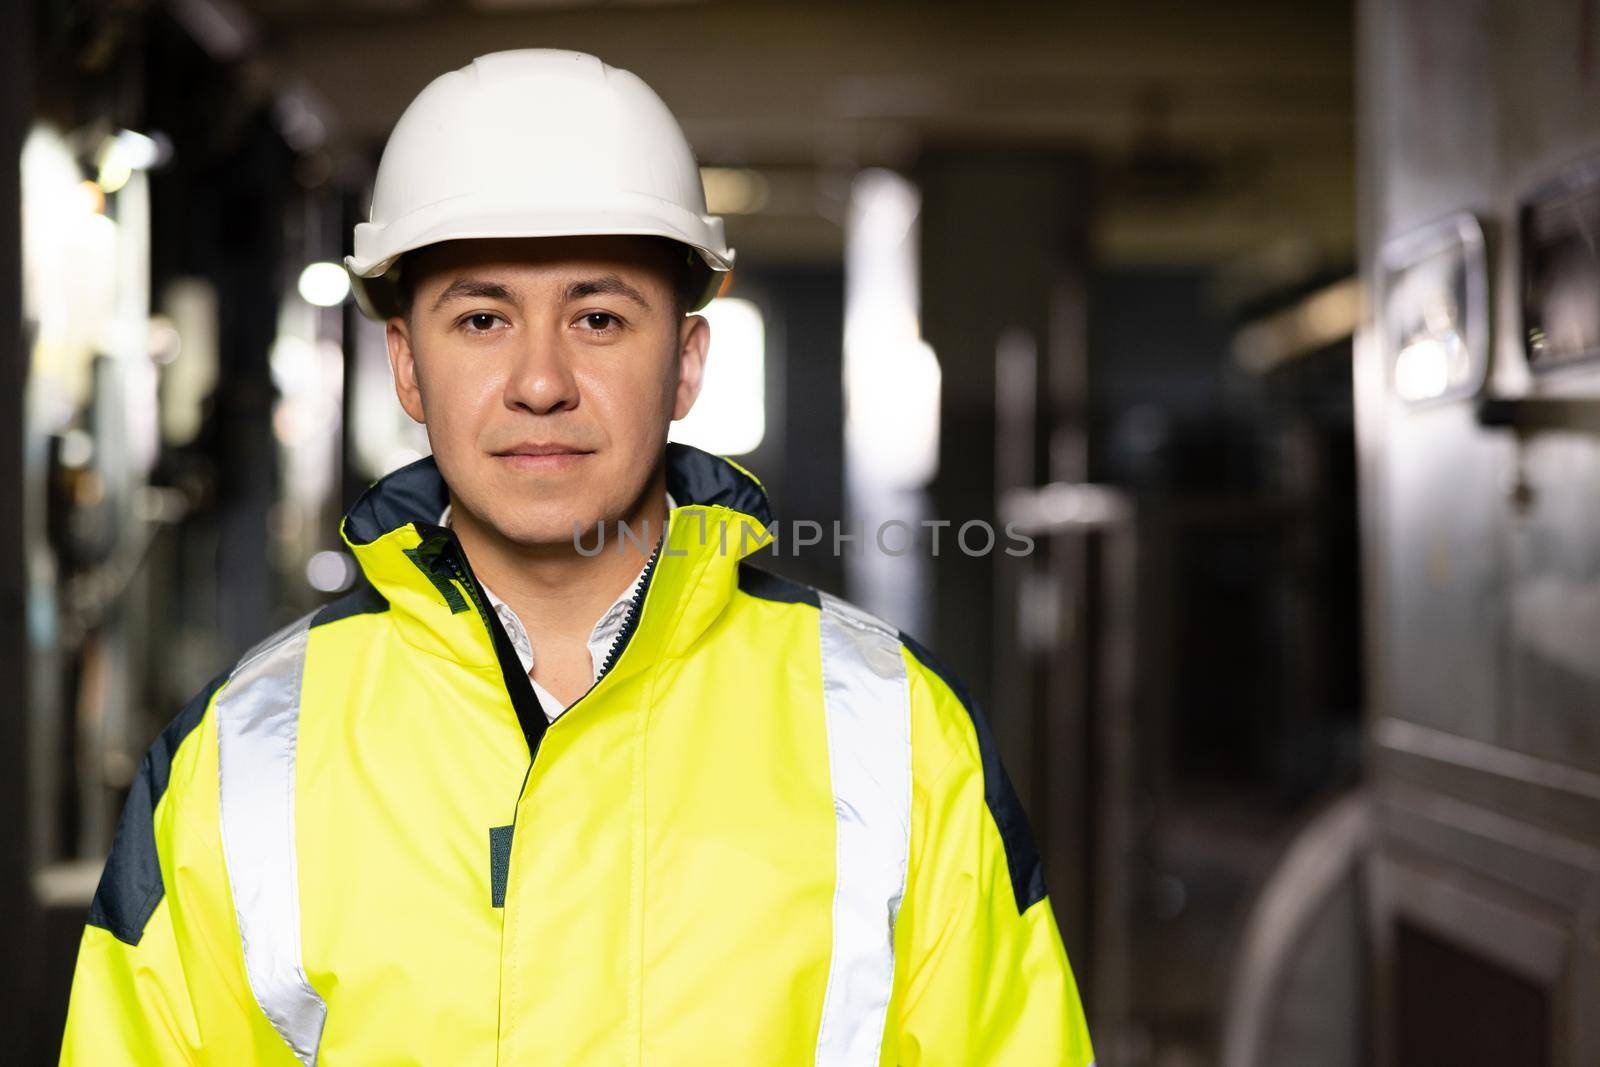 Caucasian Business People in Hard Hat or Safety Wear. Confident Contractor or Attractive Mechanic of Machine Inspection for Machinery Tool Job Close-up Indoors. Engineer Plan of Manufacture Work.